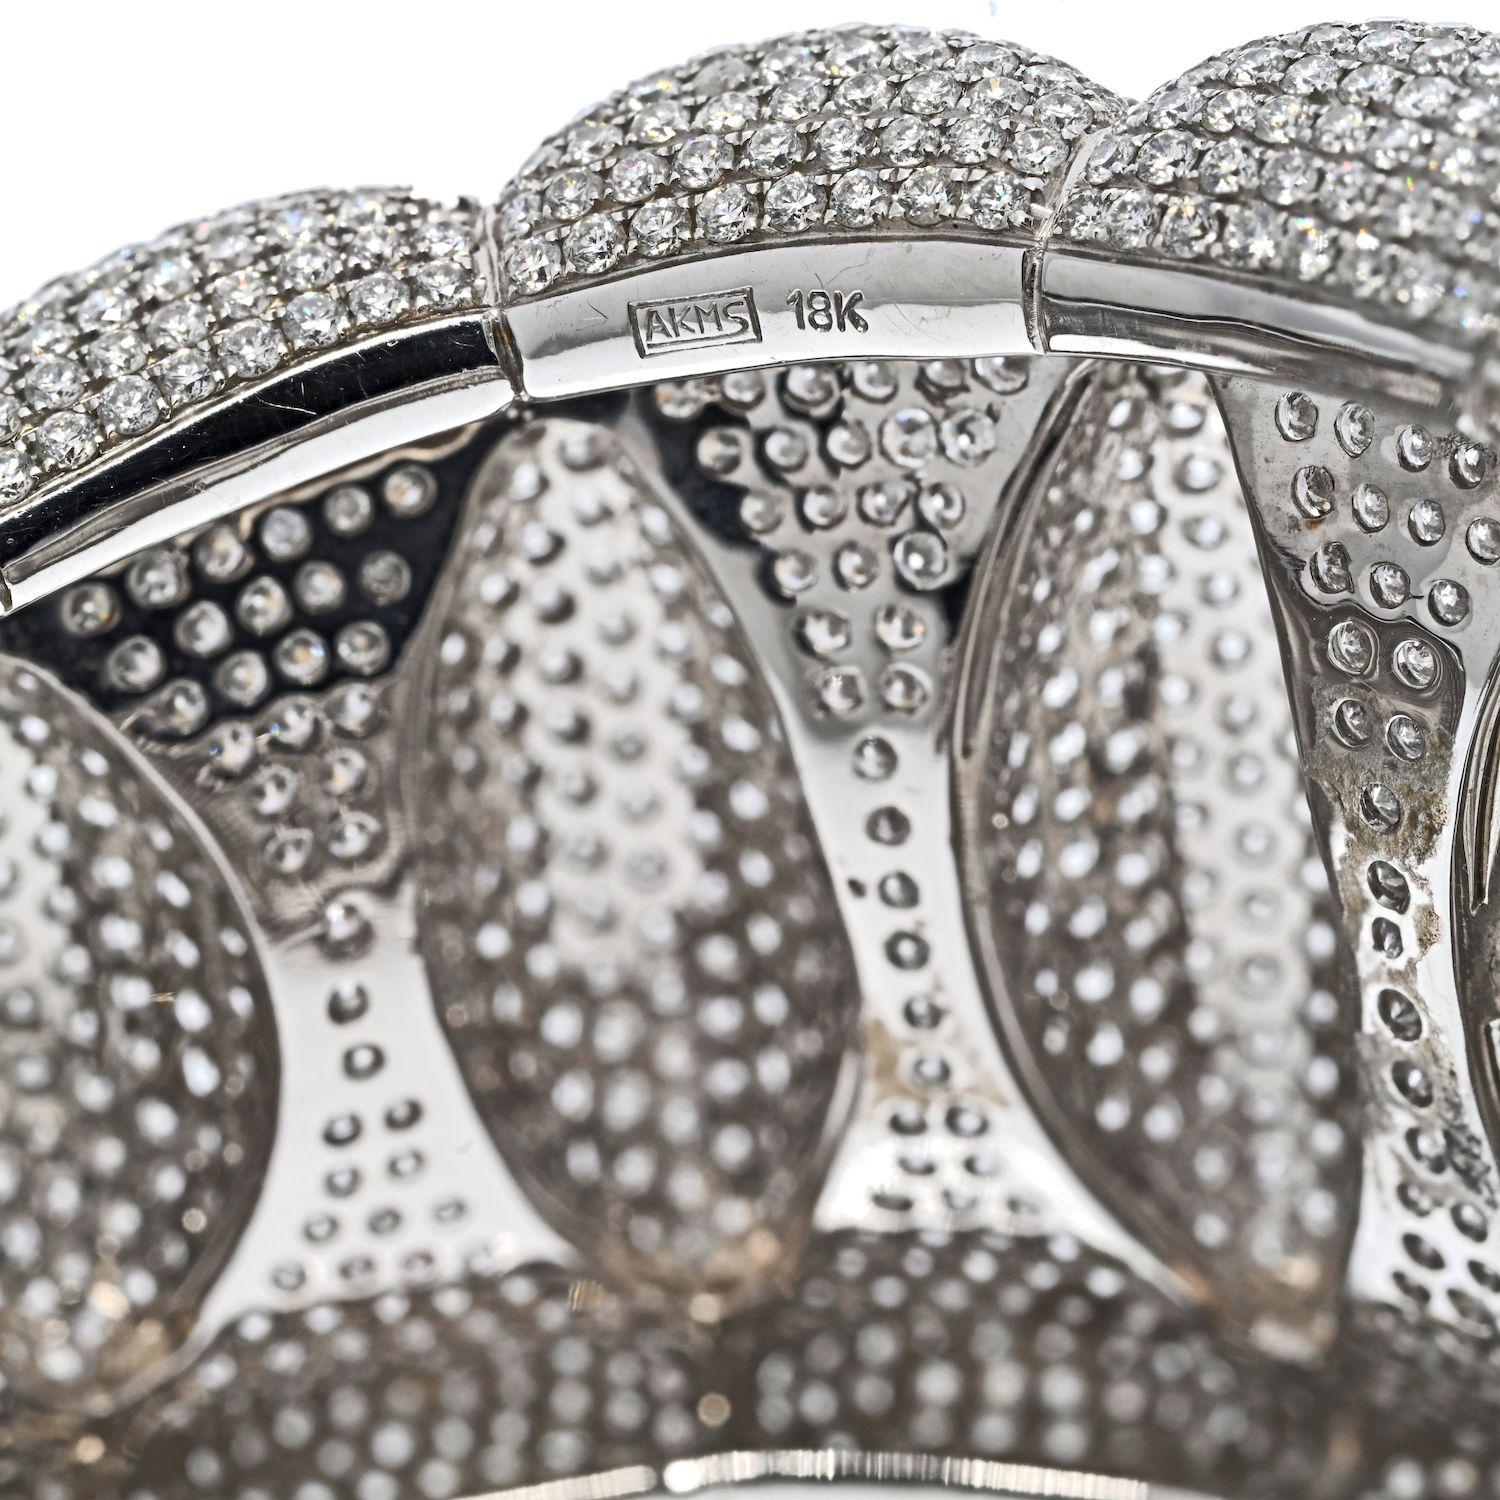 Impressive diamond cuff bangle made with round cut diamonds paved all over the cuff's surface. Made in 18K White Gold mounted with 85.00cttw of round cut diamonds. 
Wrist circumfrernce 7 inches.
Bangle Width: 4cm tapering to 2.5cm. 
Diamond Quality: